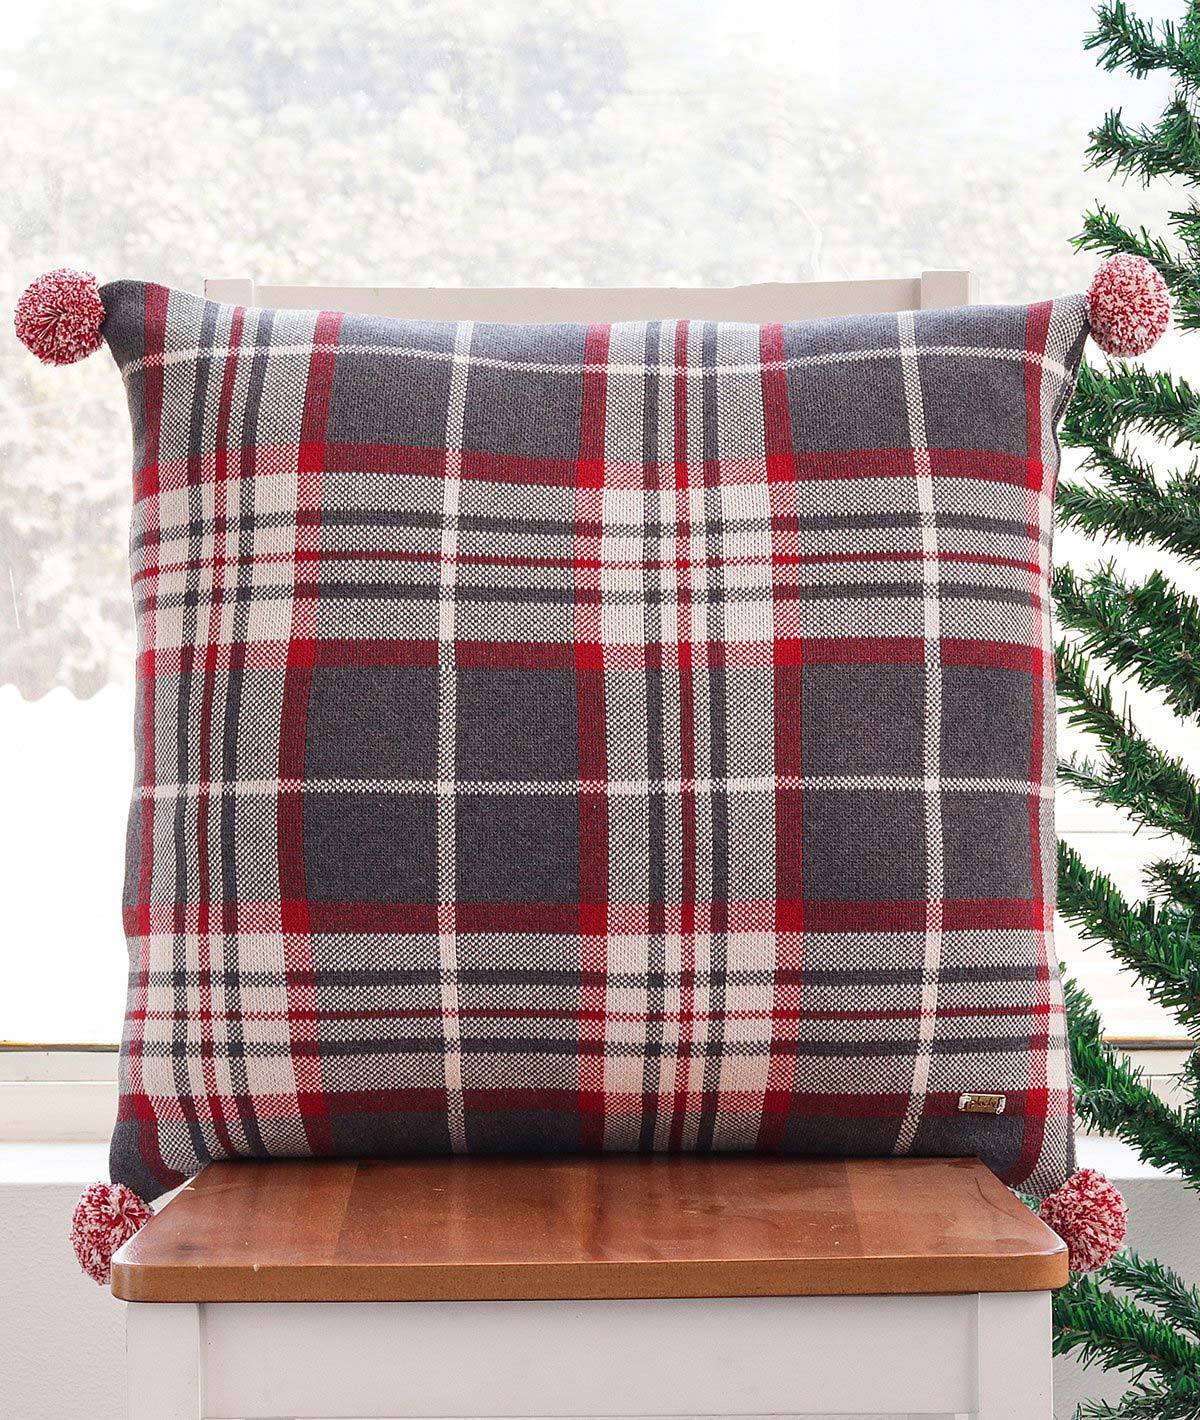 Tartan Plaid Cotton Knitted Decorative Multicolor 20 x 20 Inches Cushion Cover